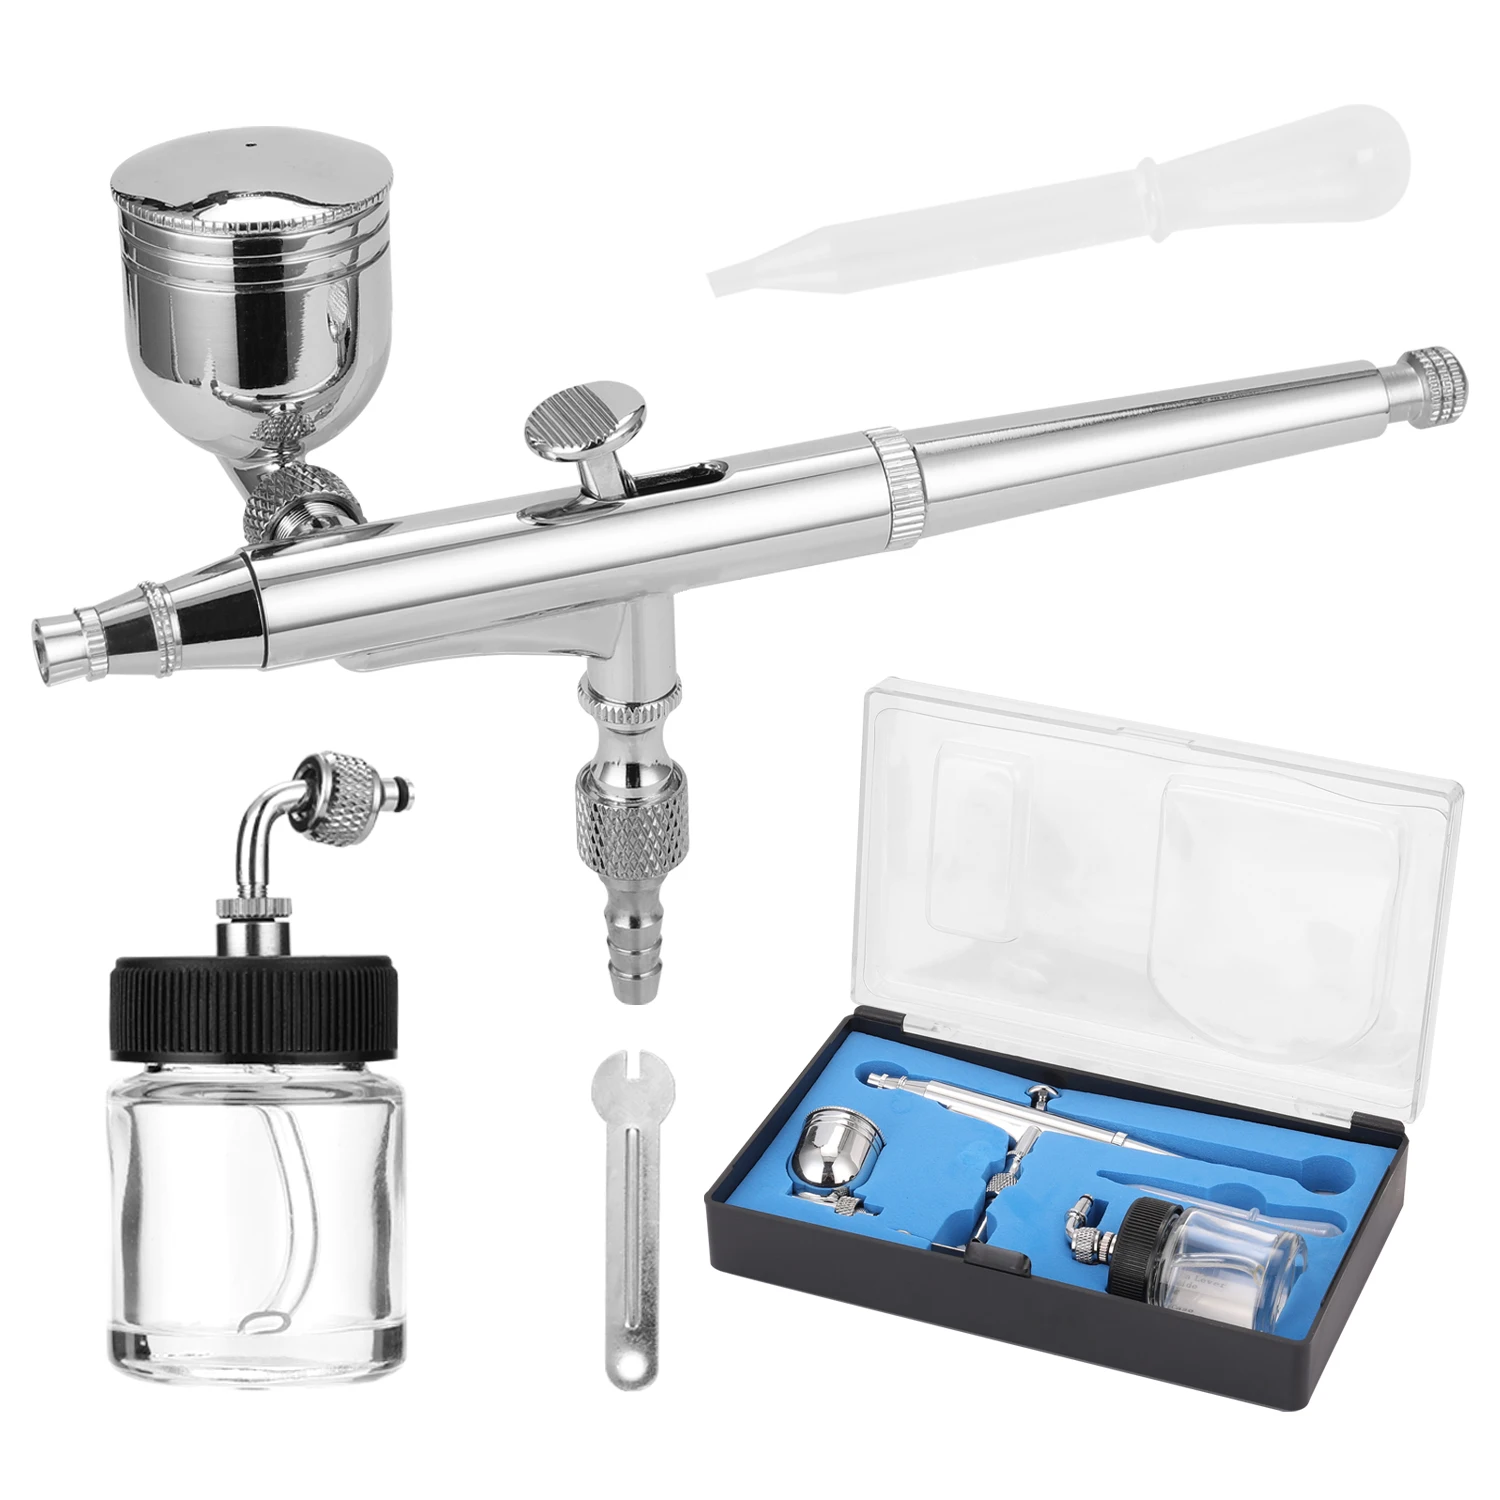 

KKMOON T134 Airbrush Set for Model Making Art Painting with G1/8 Adapter Wrench Dropper 2 Fluid Cups Spray Air Brush Nail Tool